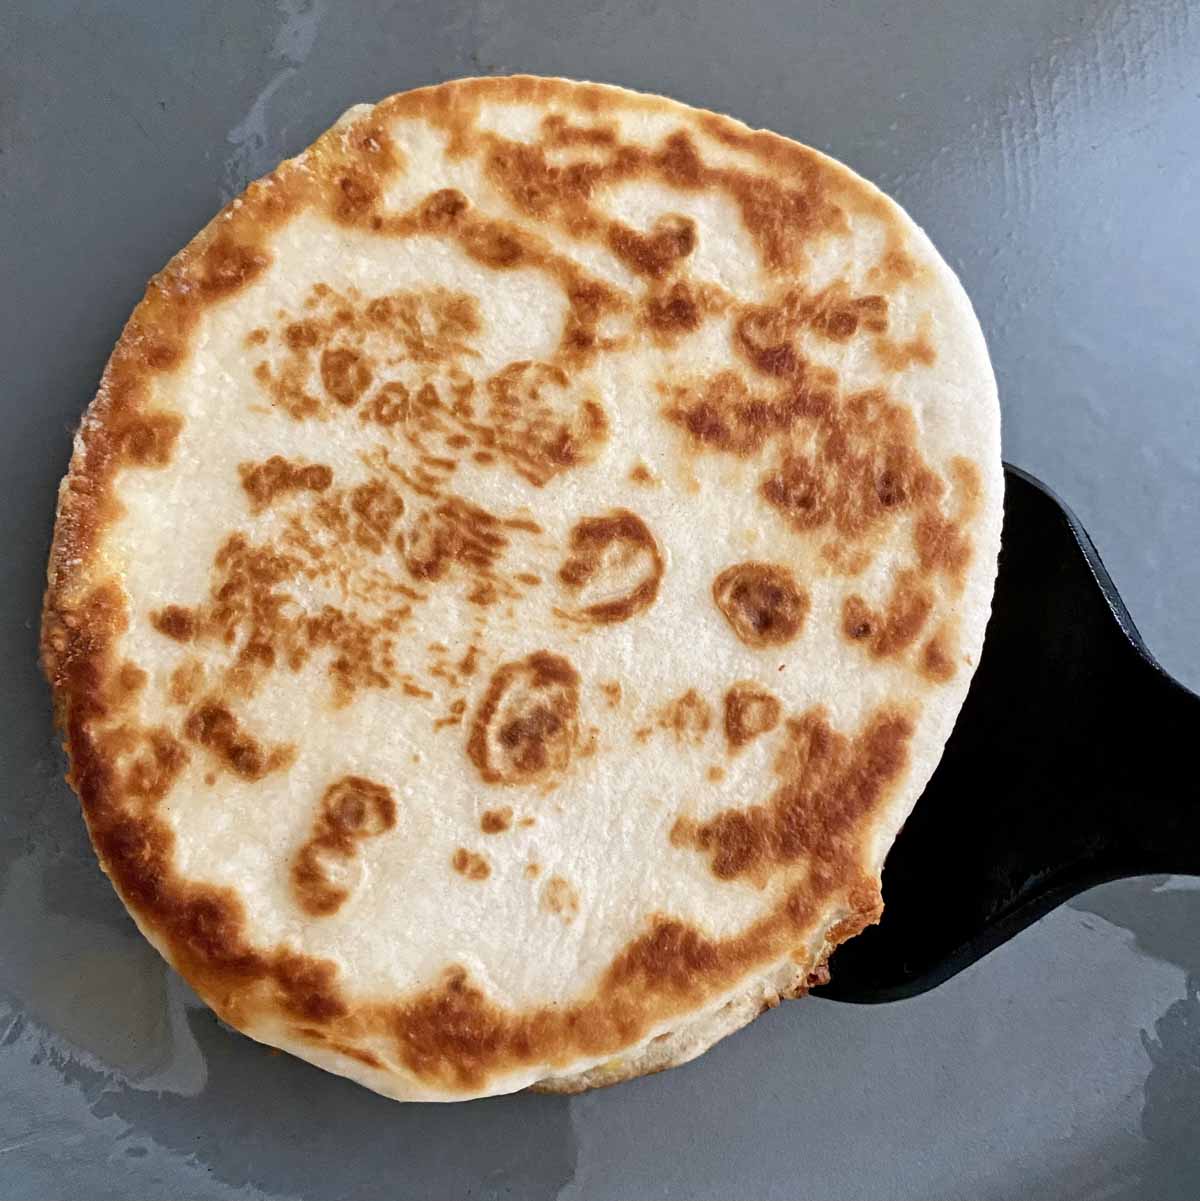 A mini quesadilla which has just been flipped over and is crispy and golden brown, in a hot frying pan.